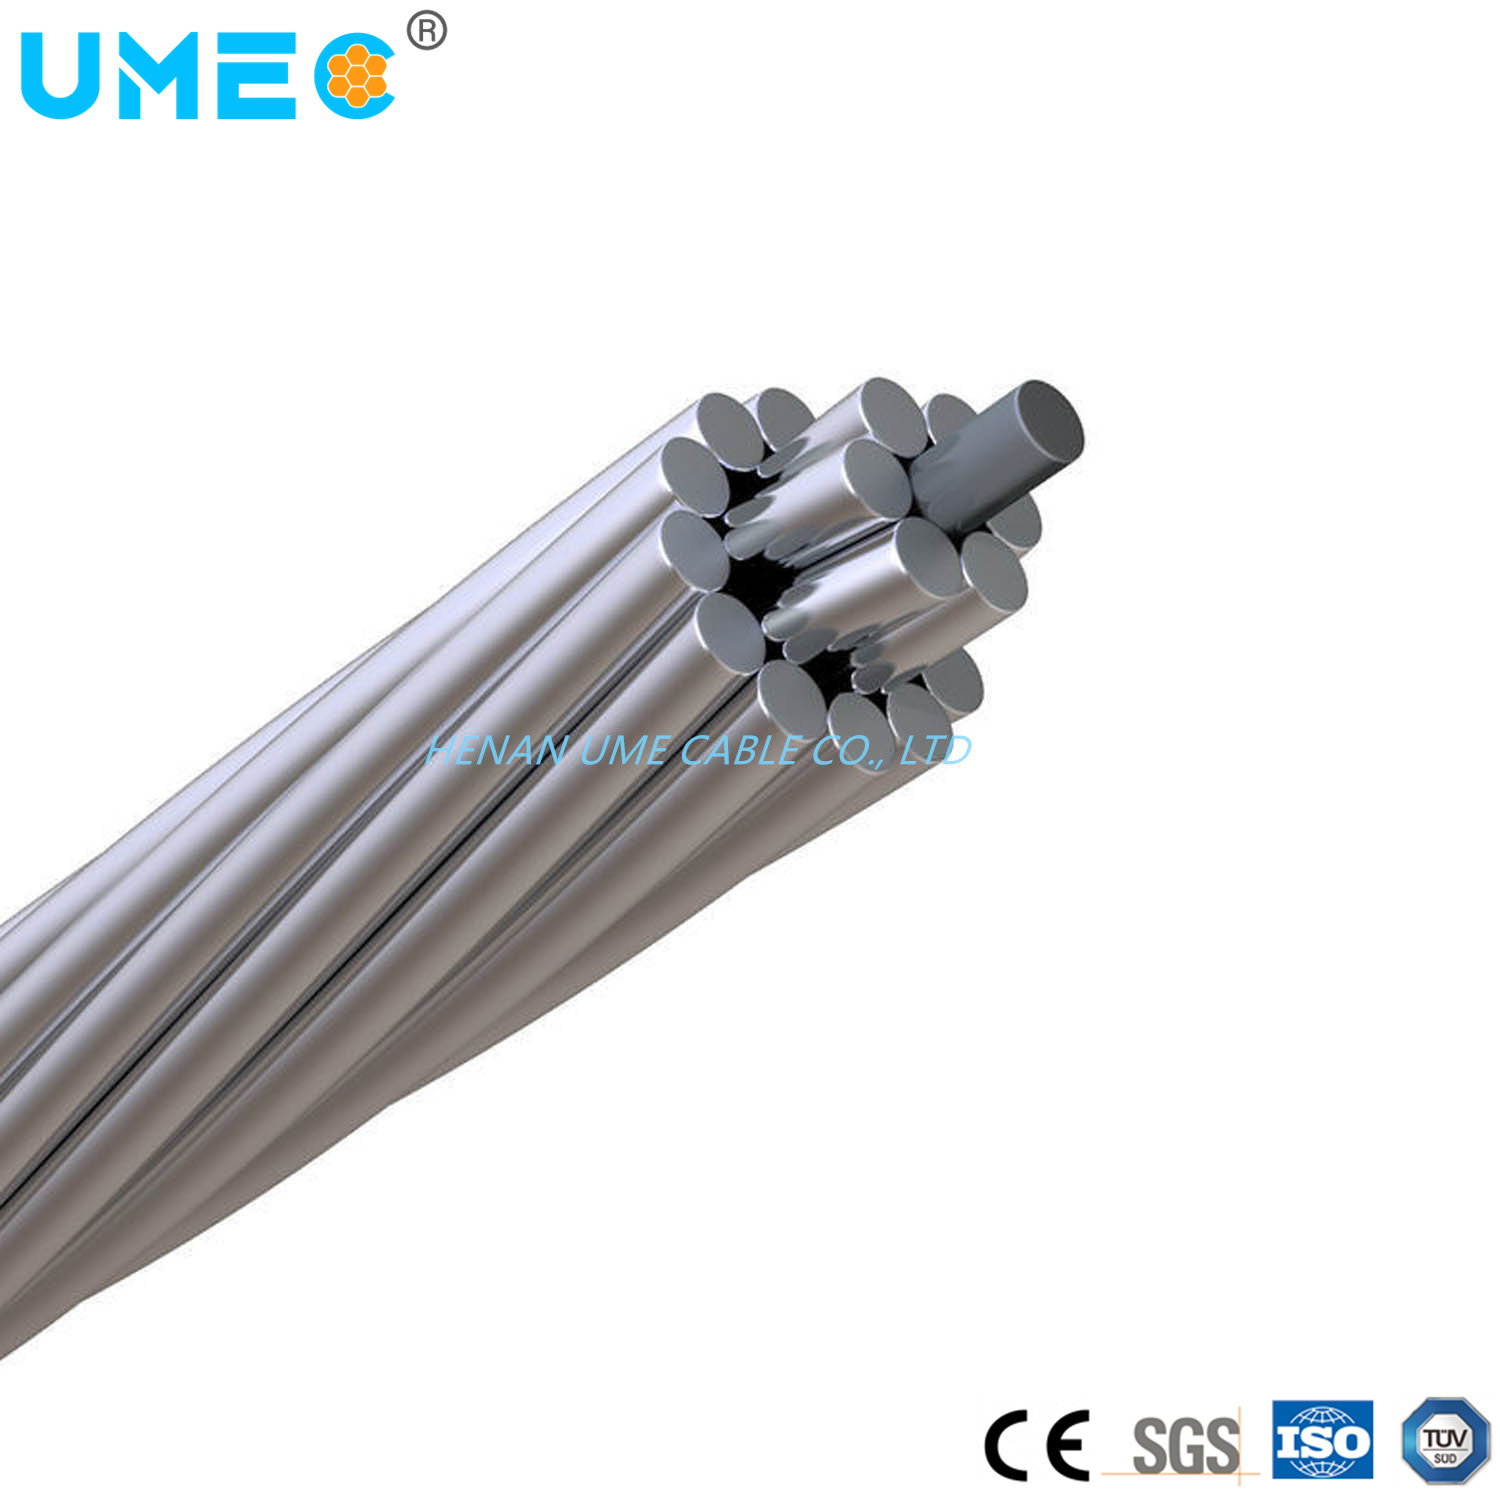 Aluminum Alloy Stranded Conductor Steel Reinforced Aacsr Conductor